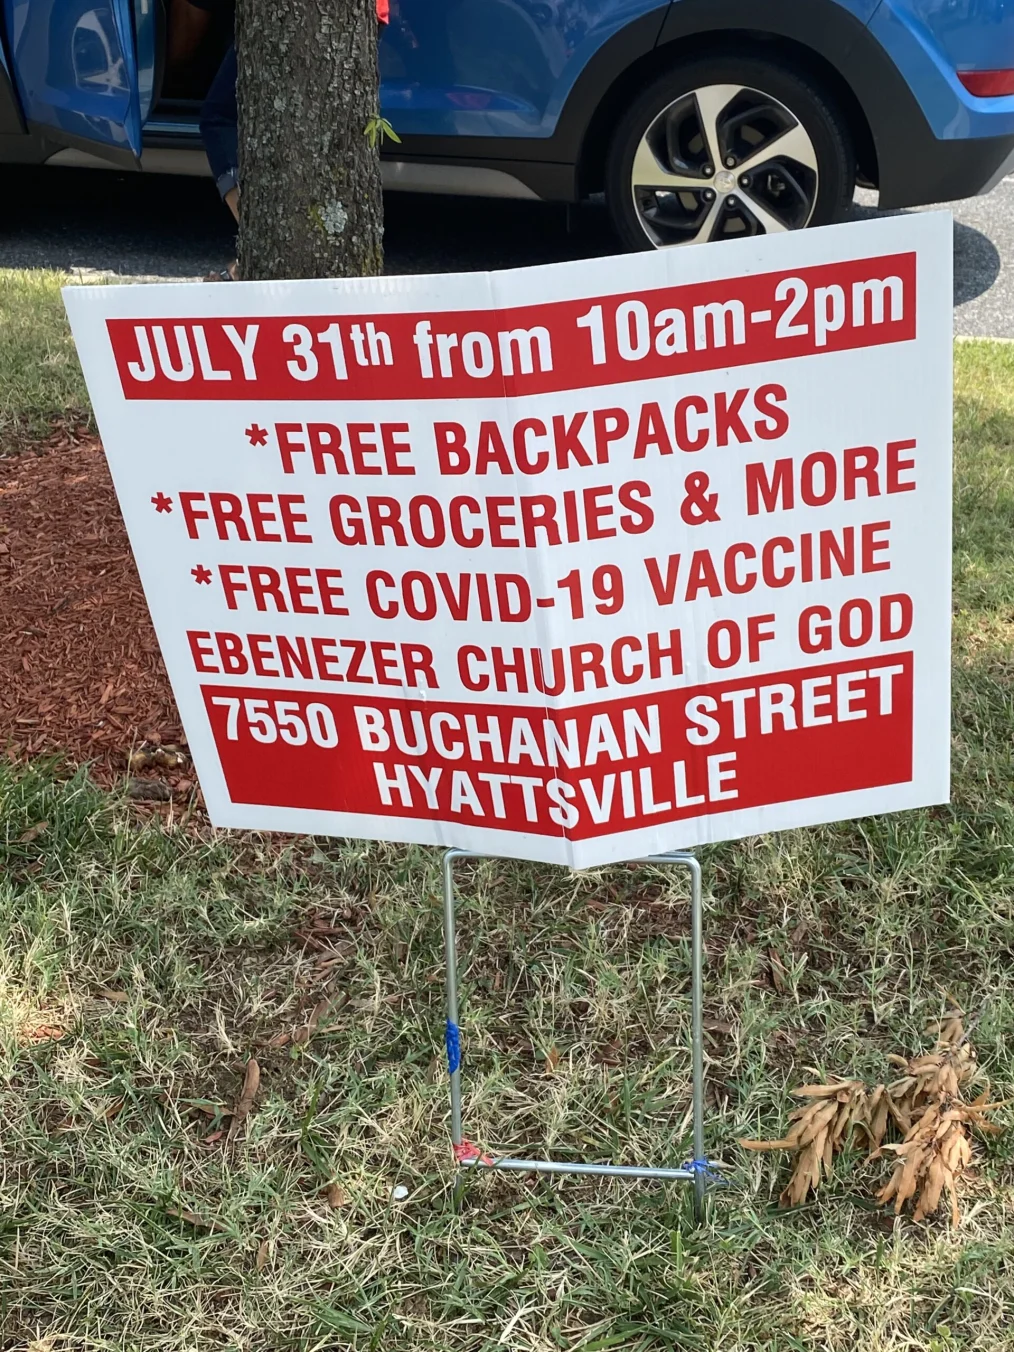 A white sign with red writing offers free backpacks, free groceries, free COVID-19 vaccines, and more.